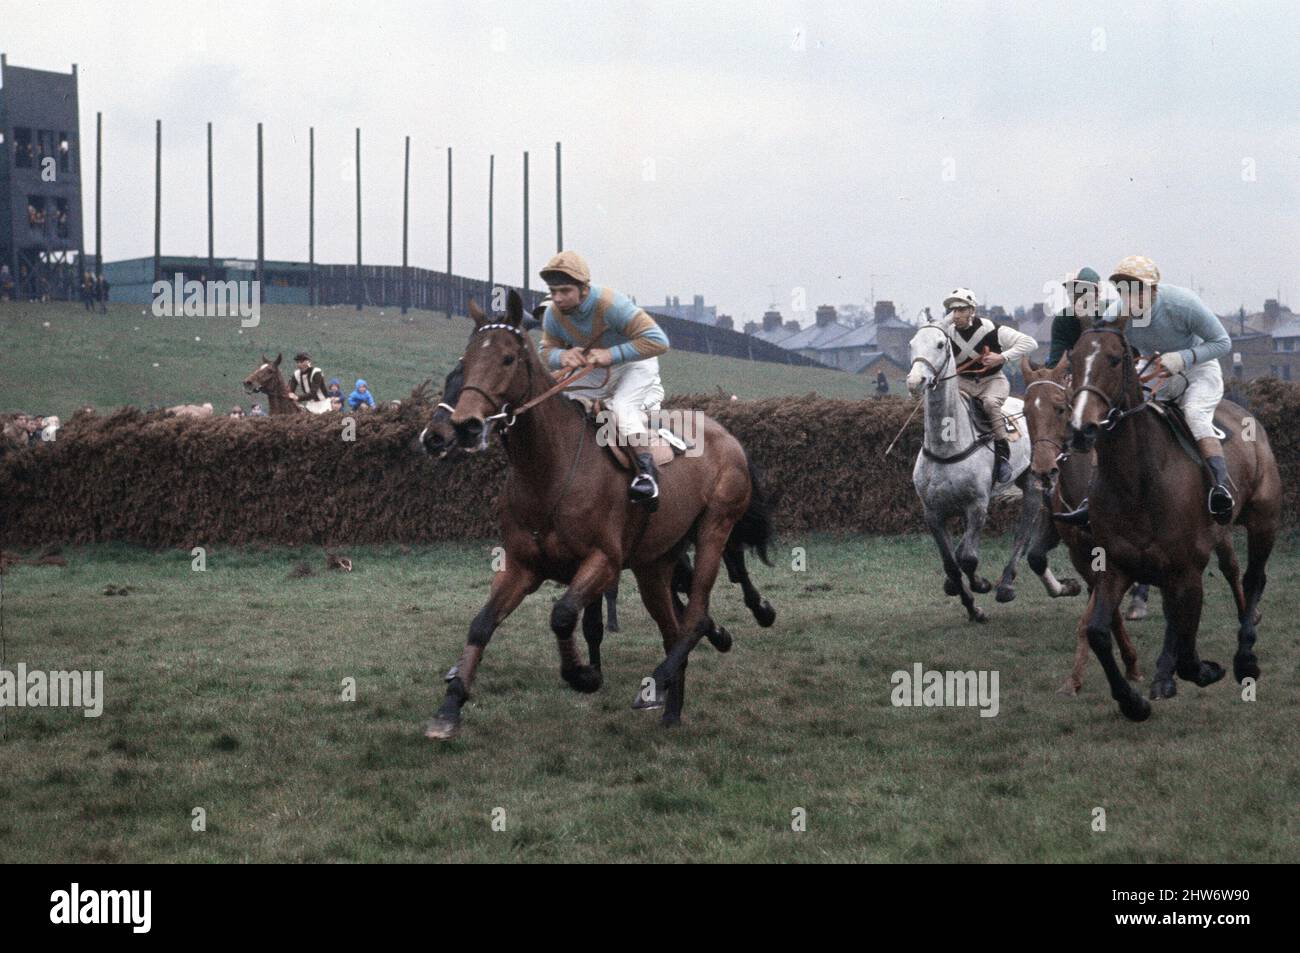 Grand National Horserace in Aintree, Liverpool. 8.. April 1967. Stockfoto